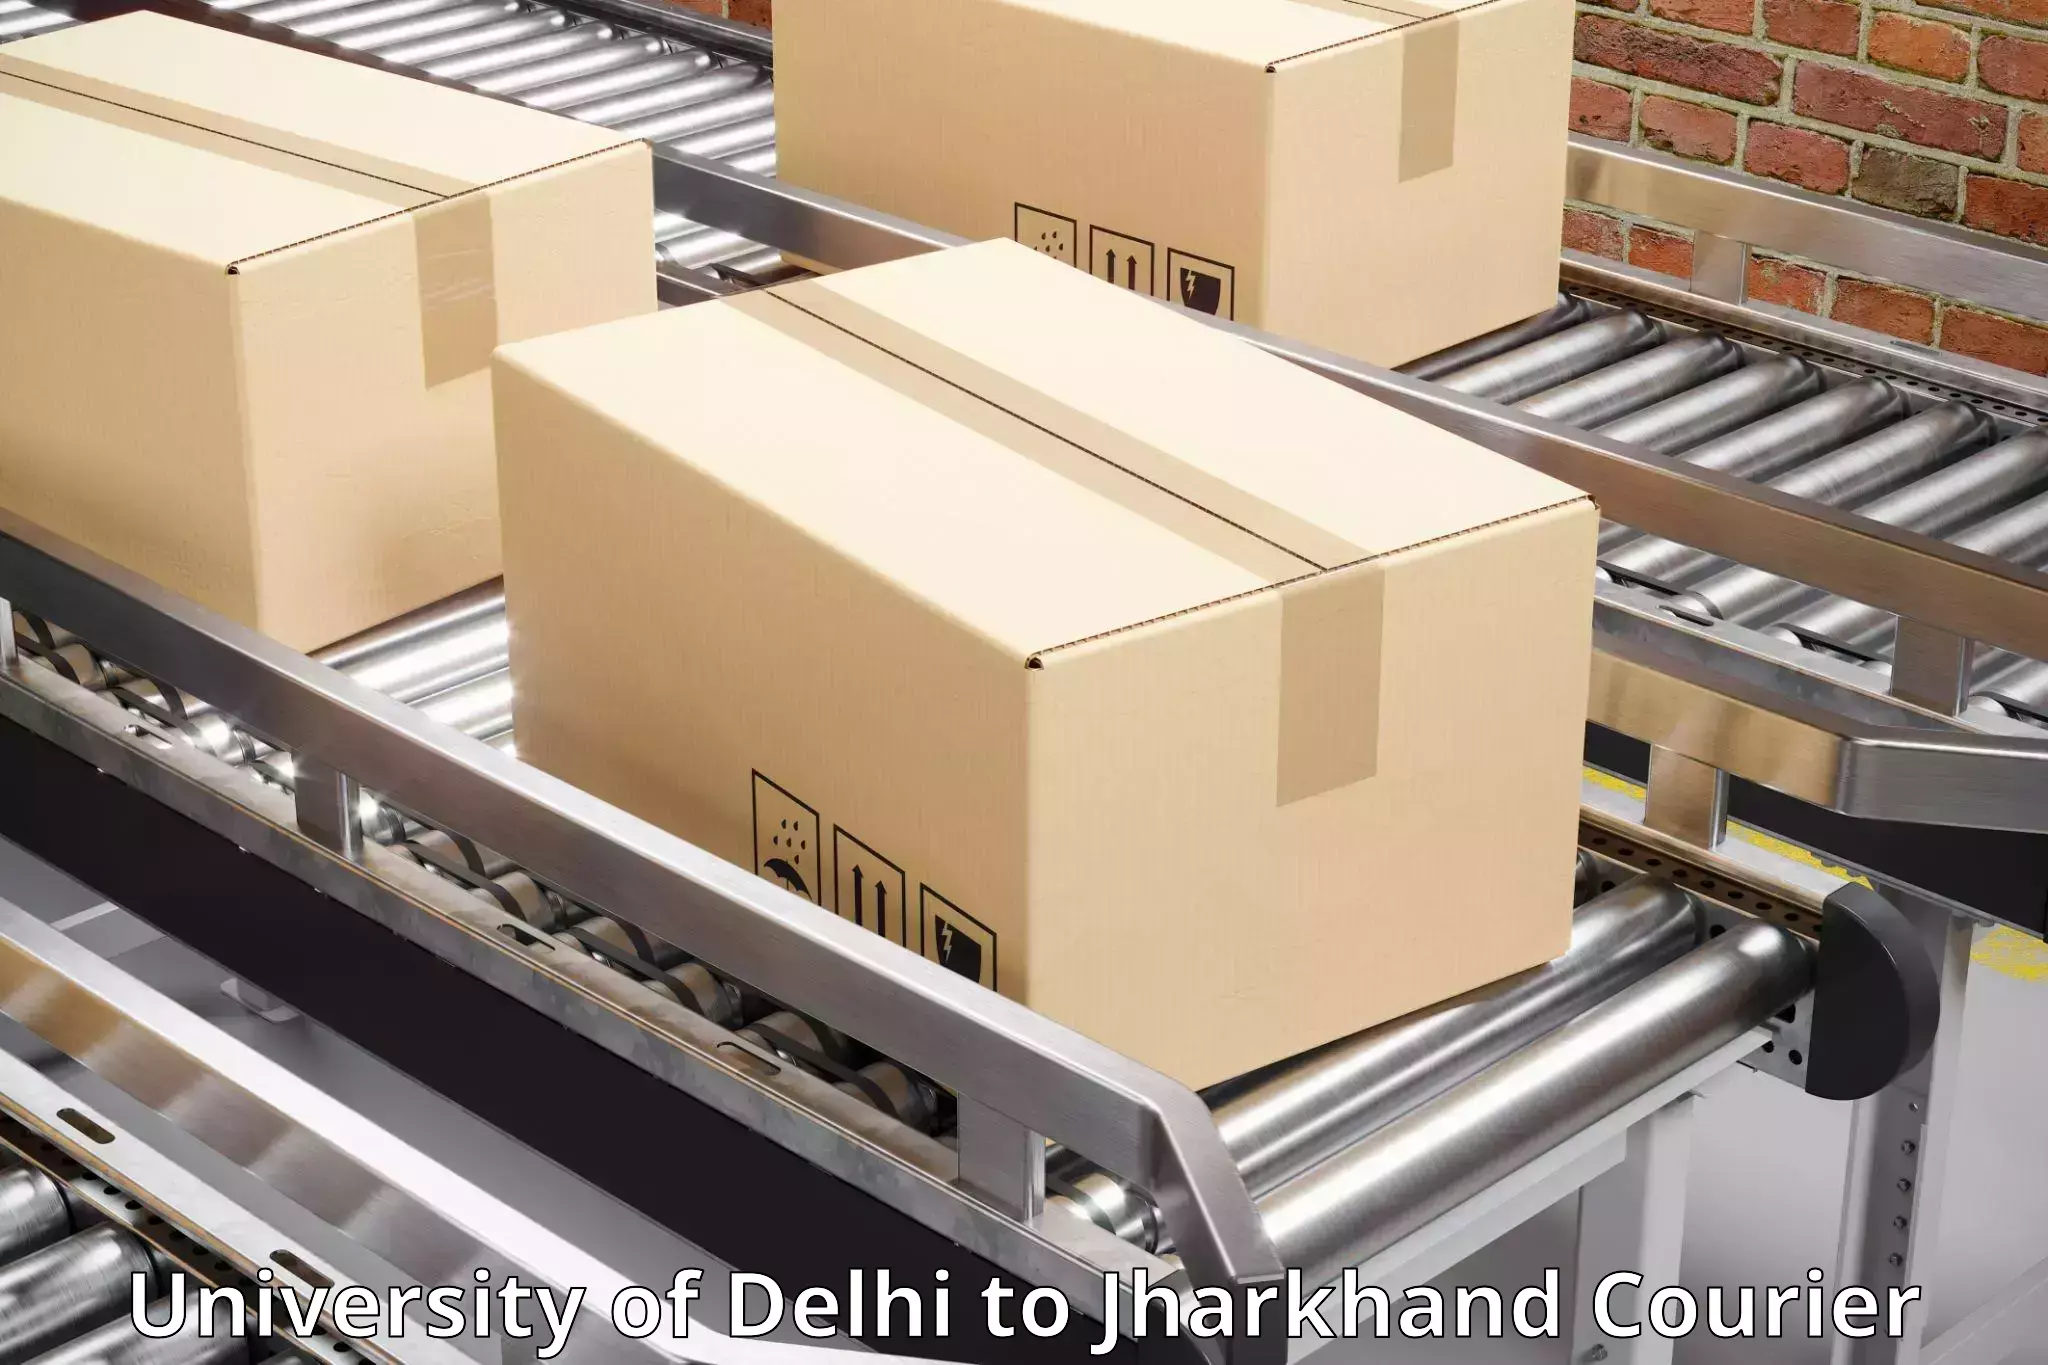 Rapid freight solutions in University of Delhi to Tandwa